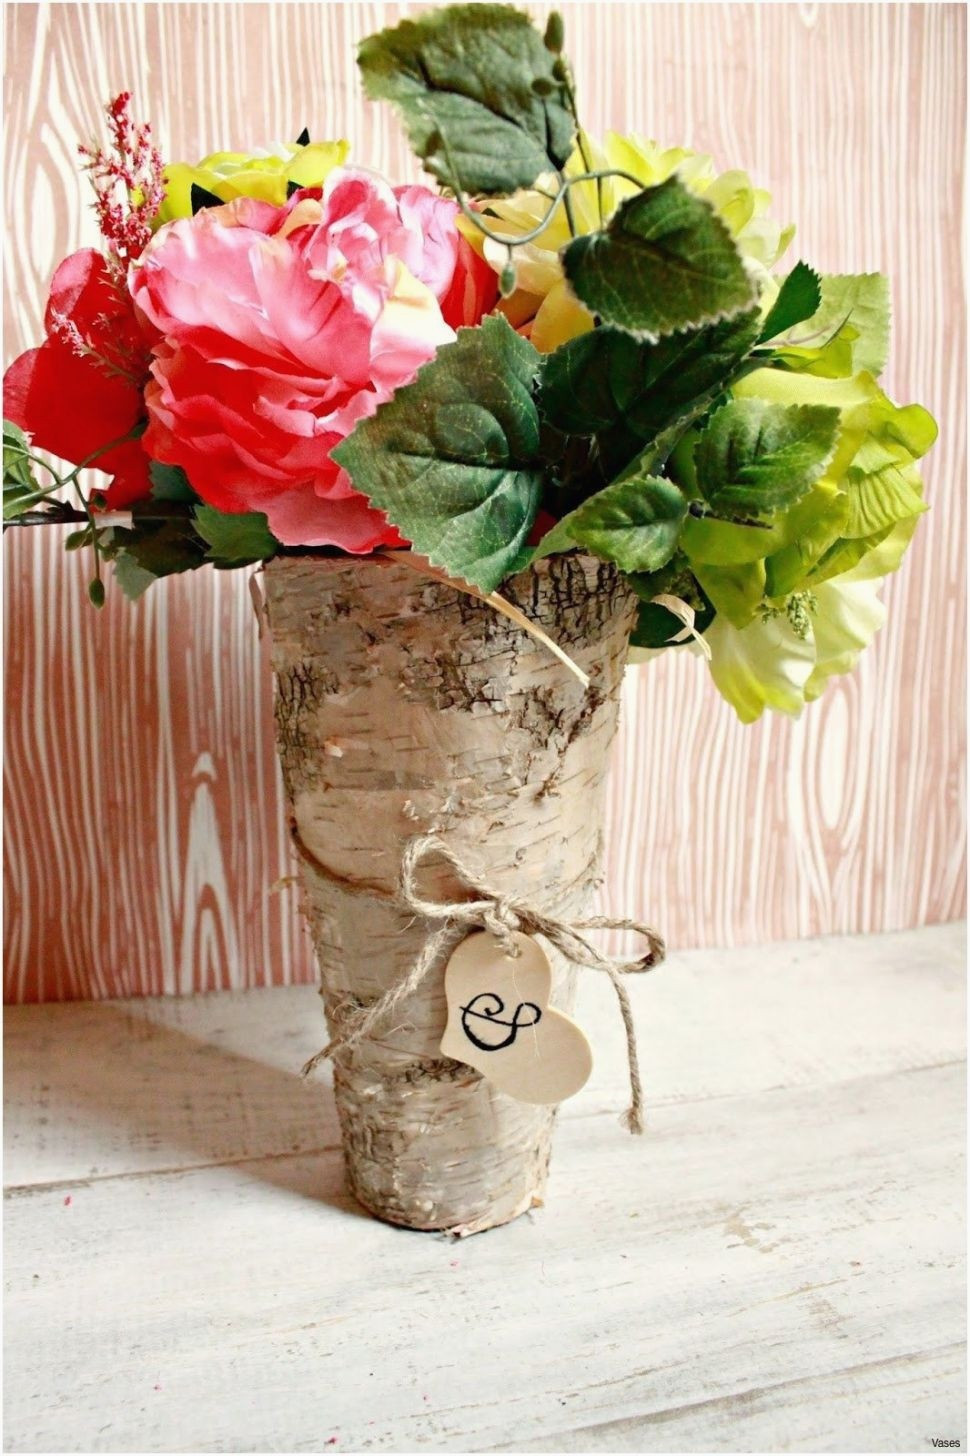 30 Stylish Artificial Flower Arrangements In Vases 2024 free download artificial flower arrangements in vases of 15 adorable artificial floral arrangements for dining table thunder for wed beautiful wedding floral decorations silk bouquets h vases diy wood vas